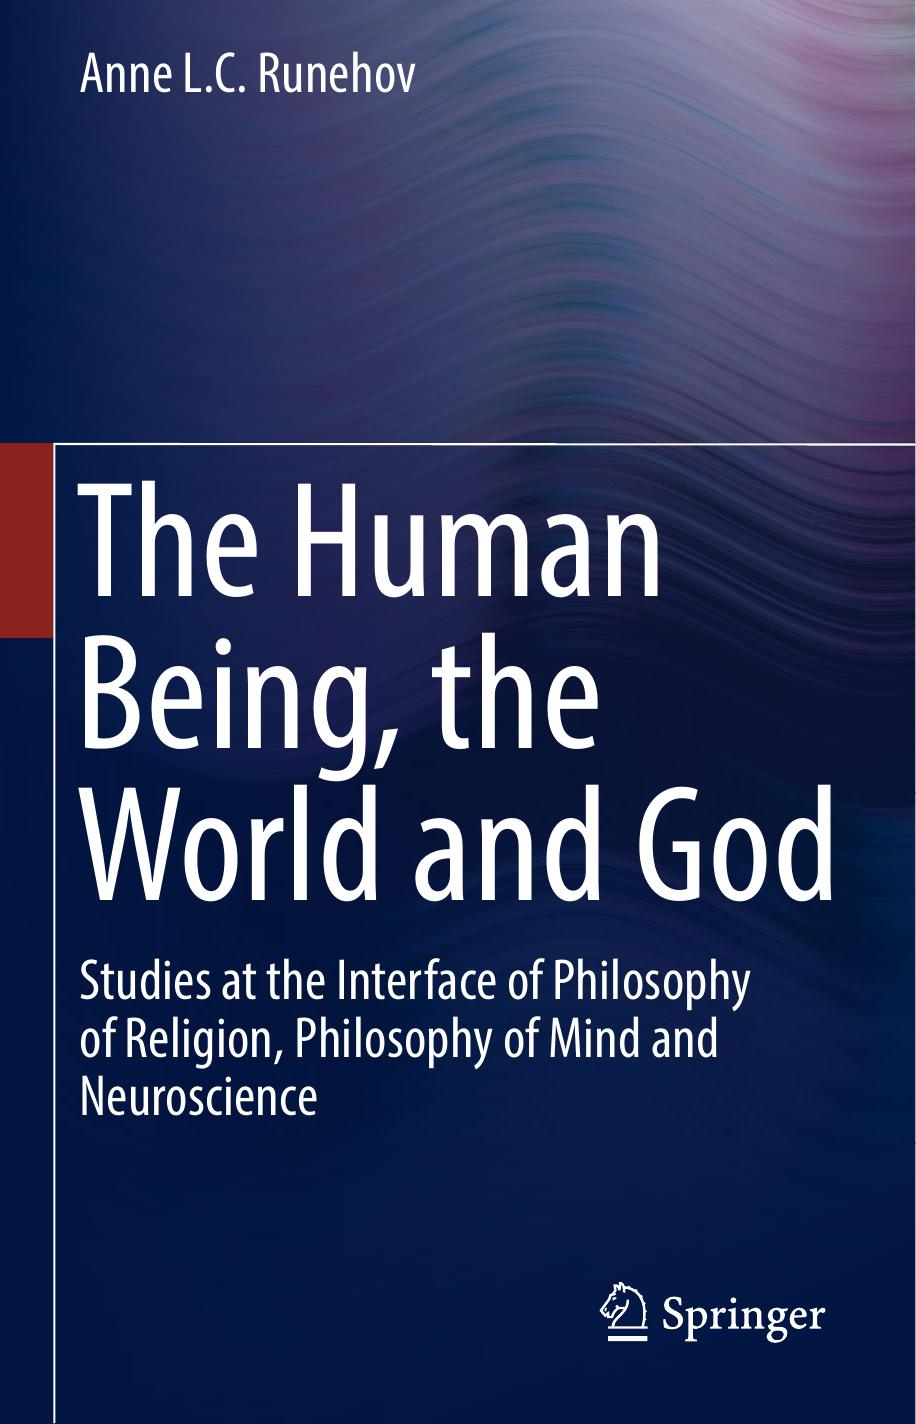 The Human Being, the World and God Studies at the Interface of Philosophy of Religion, Philosophy of Mind and Neuroscience 2016